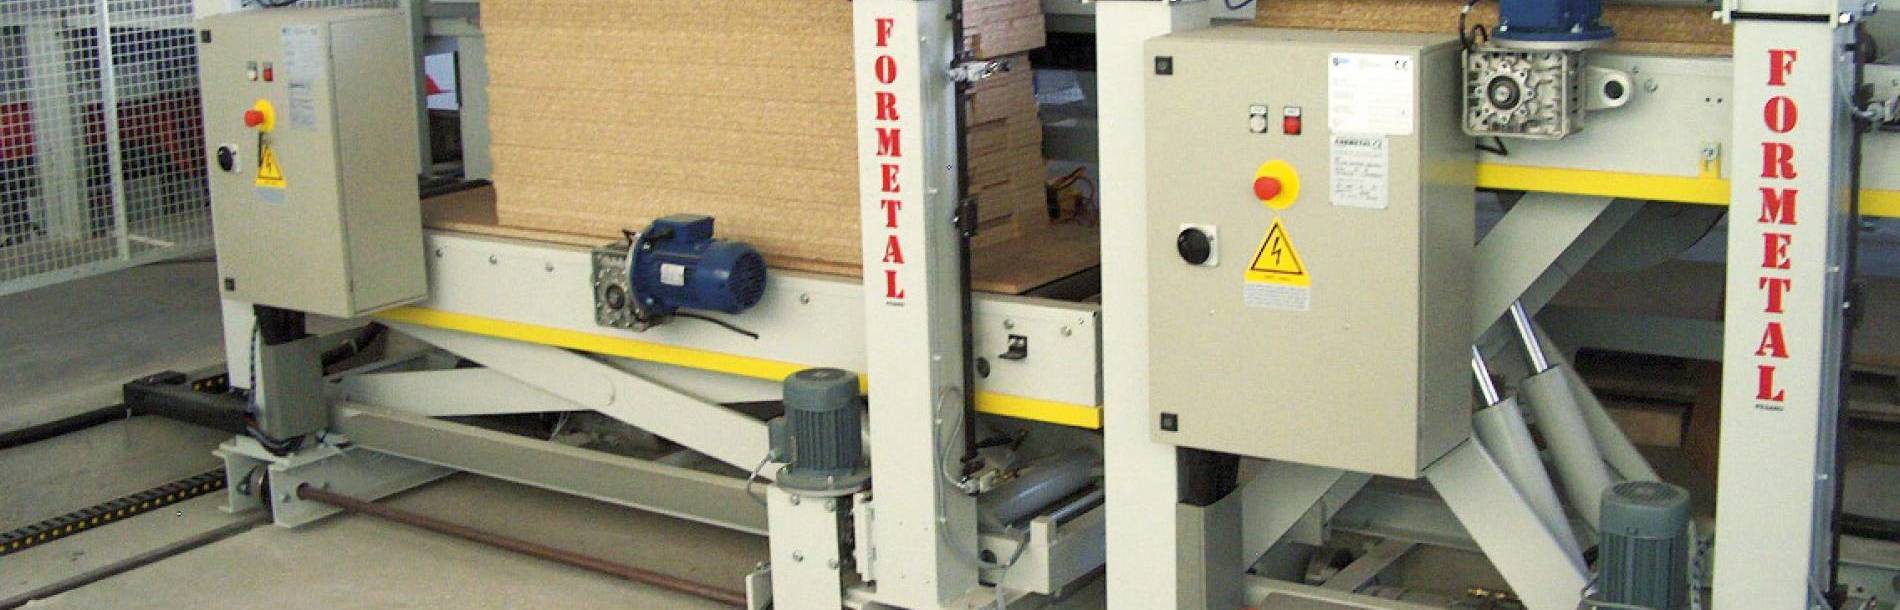 AUTOMATIC ELEVATORS FOR PANEL SAW UNLOADING